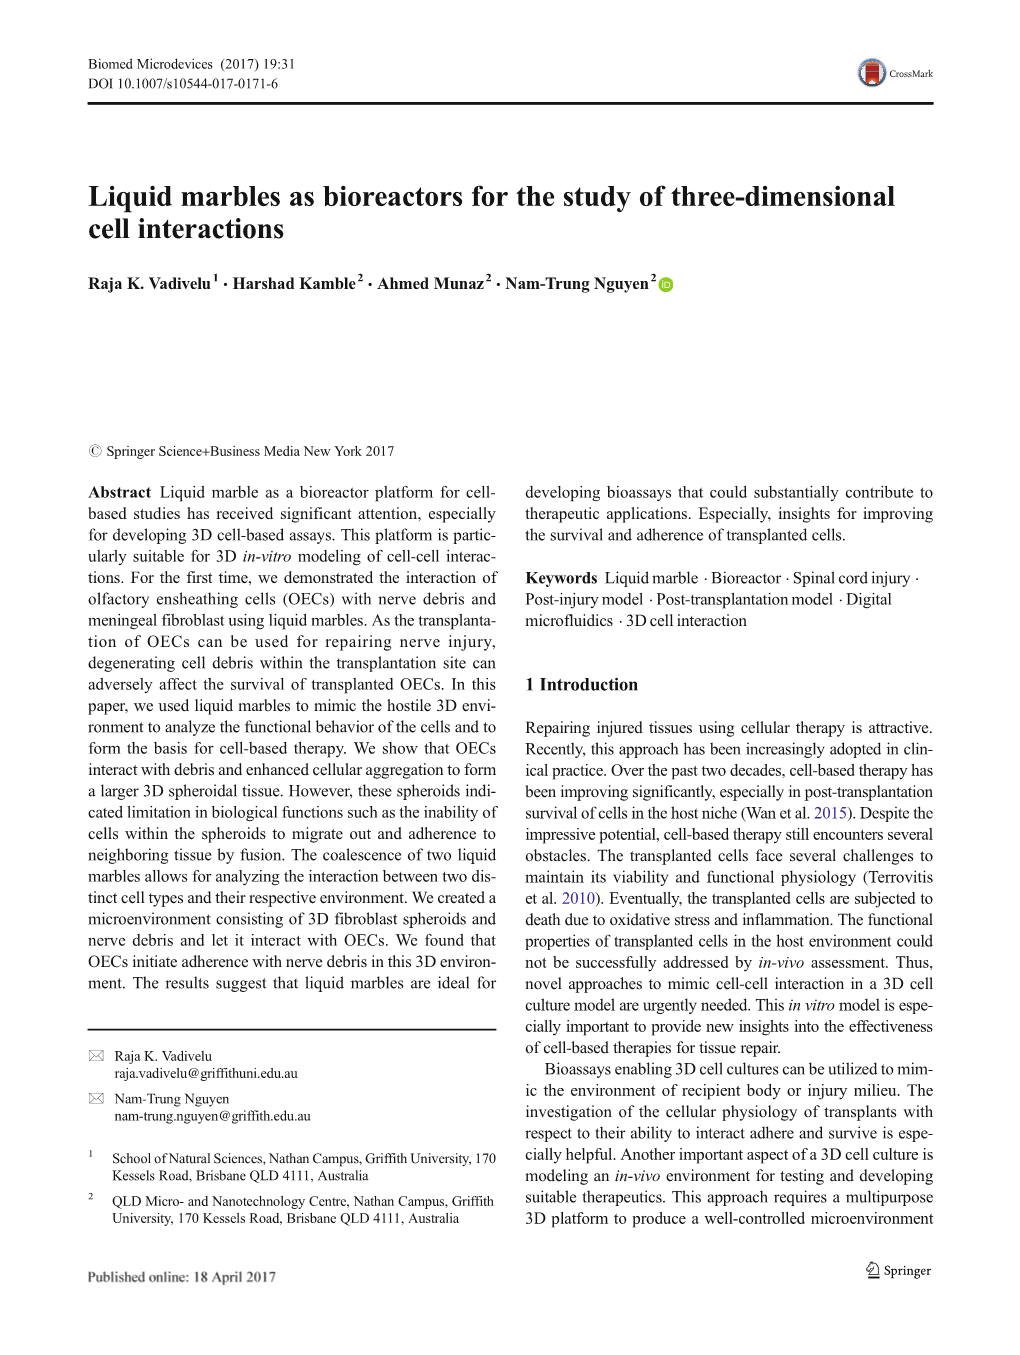 Liquid Marbles As Bioreactors for the Study of Three-Dimensional Cell Interactions